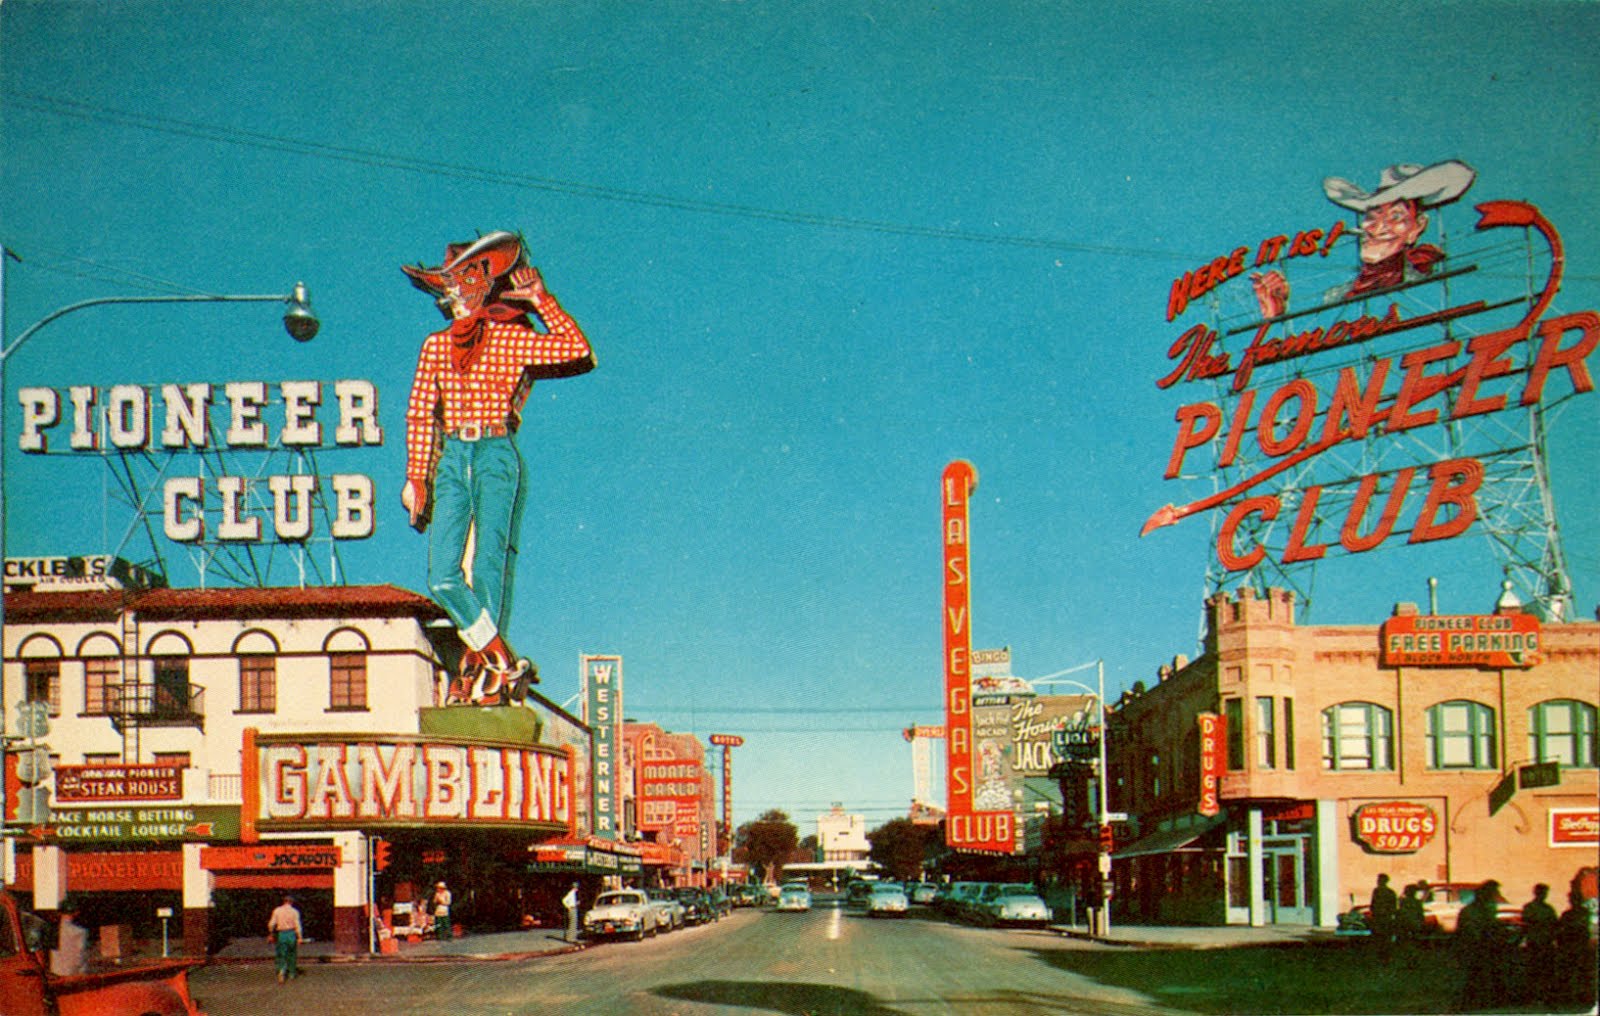 Vintage Photos of Las Vegas in the 1950s and 1960s ~ vintage everyday1600 x 1016